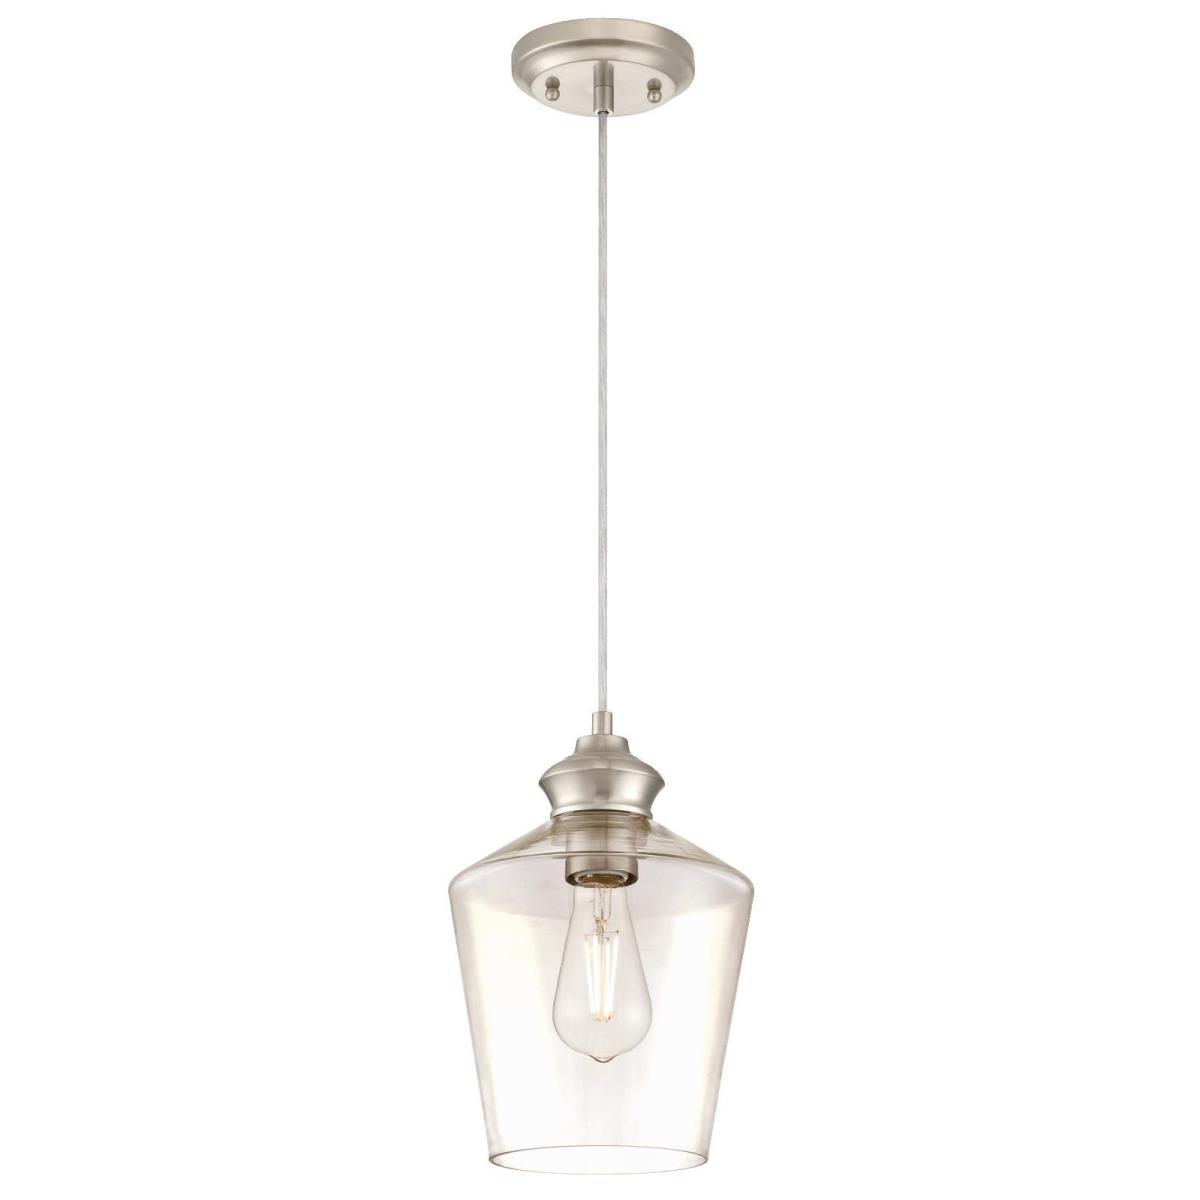 1 Light Mini Pendant Brushed Nickel Finish with Clear Glass